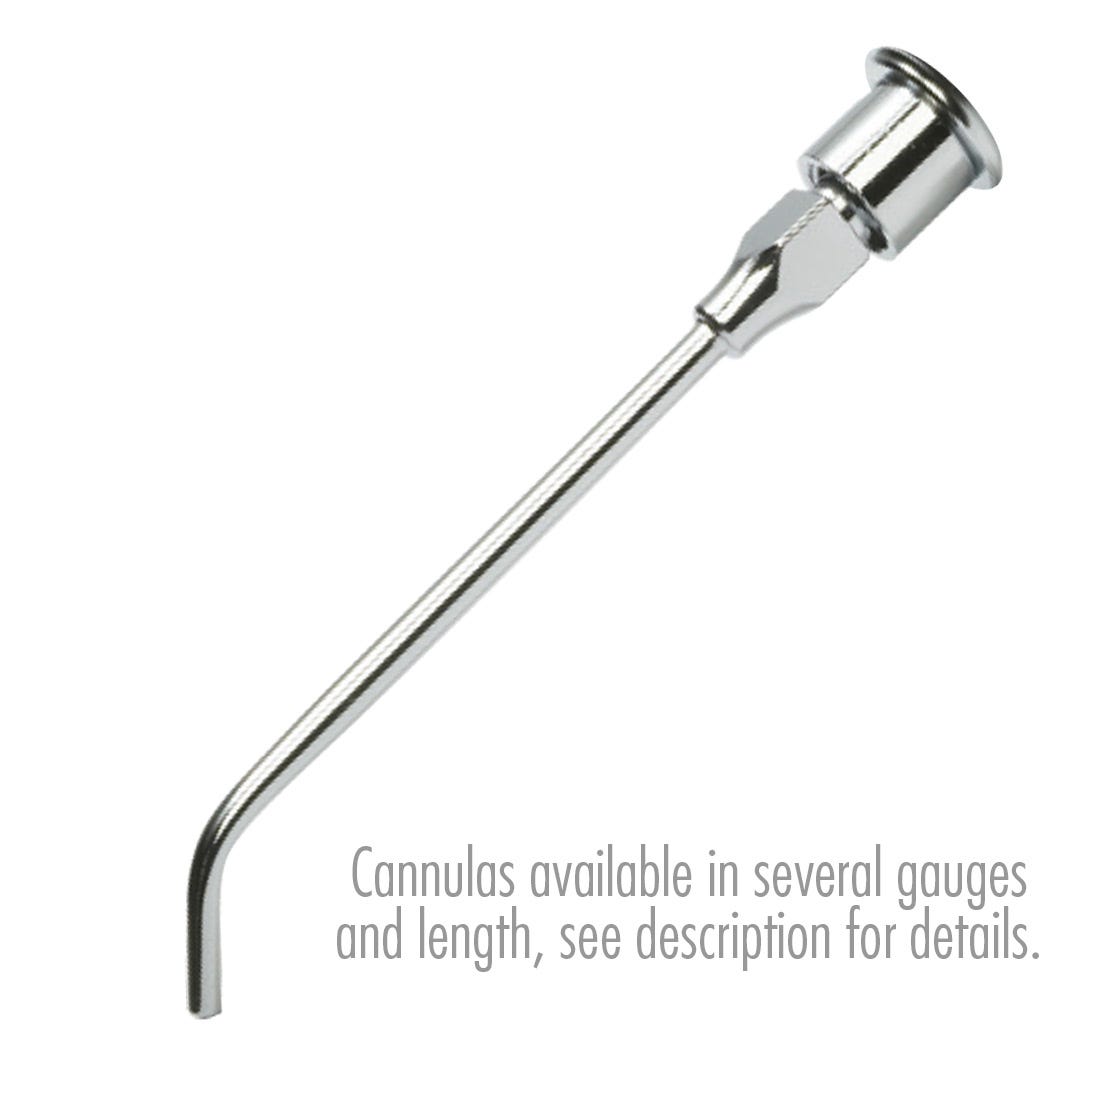 ACE Irrigation Cannula - Stainless Steel 20G x 3", 45 degree angle